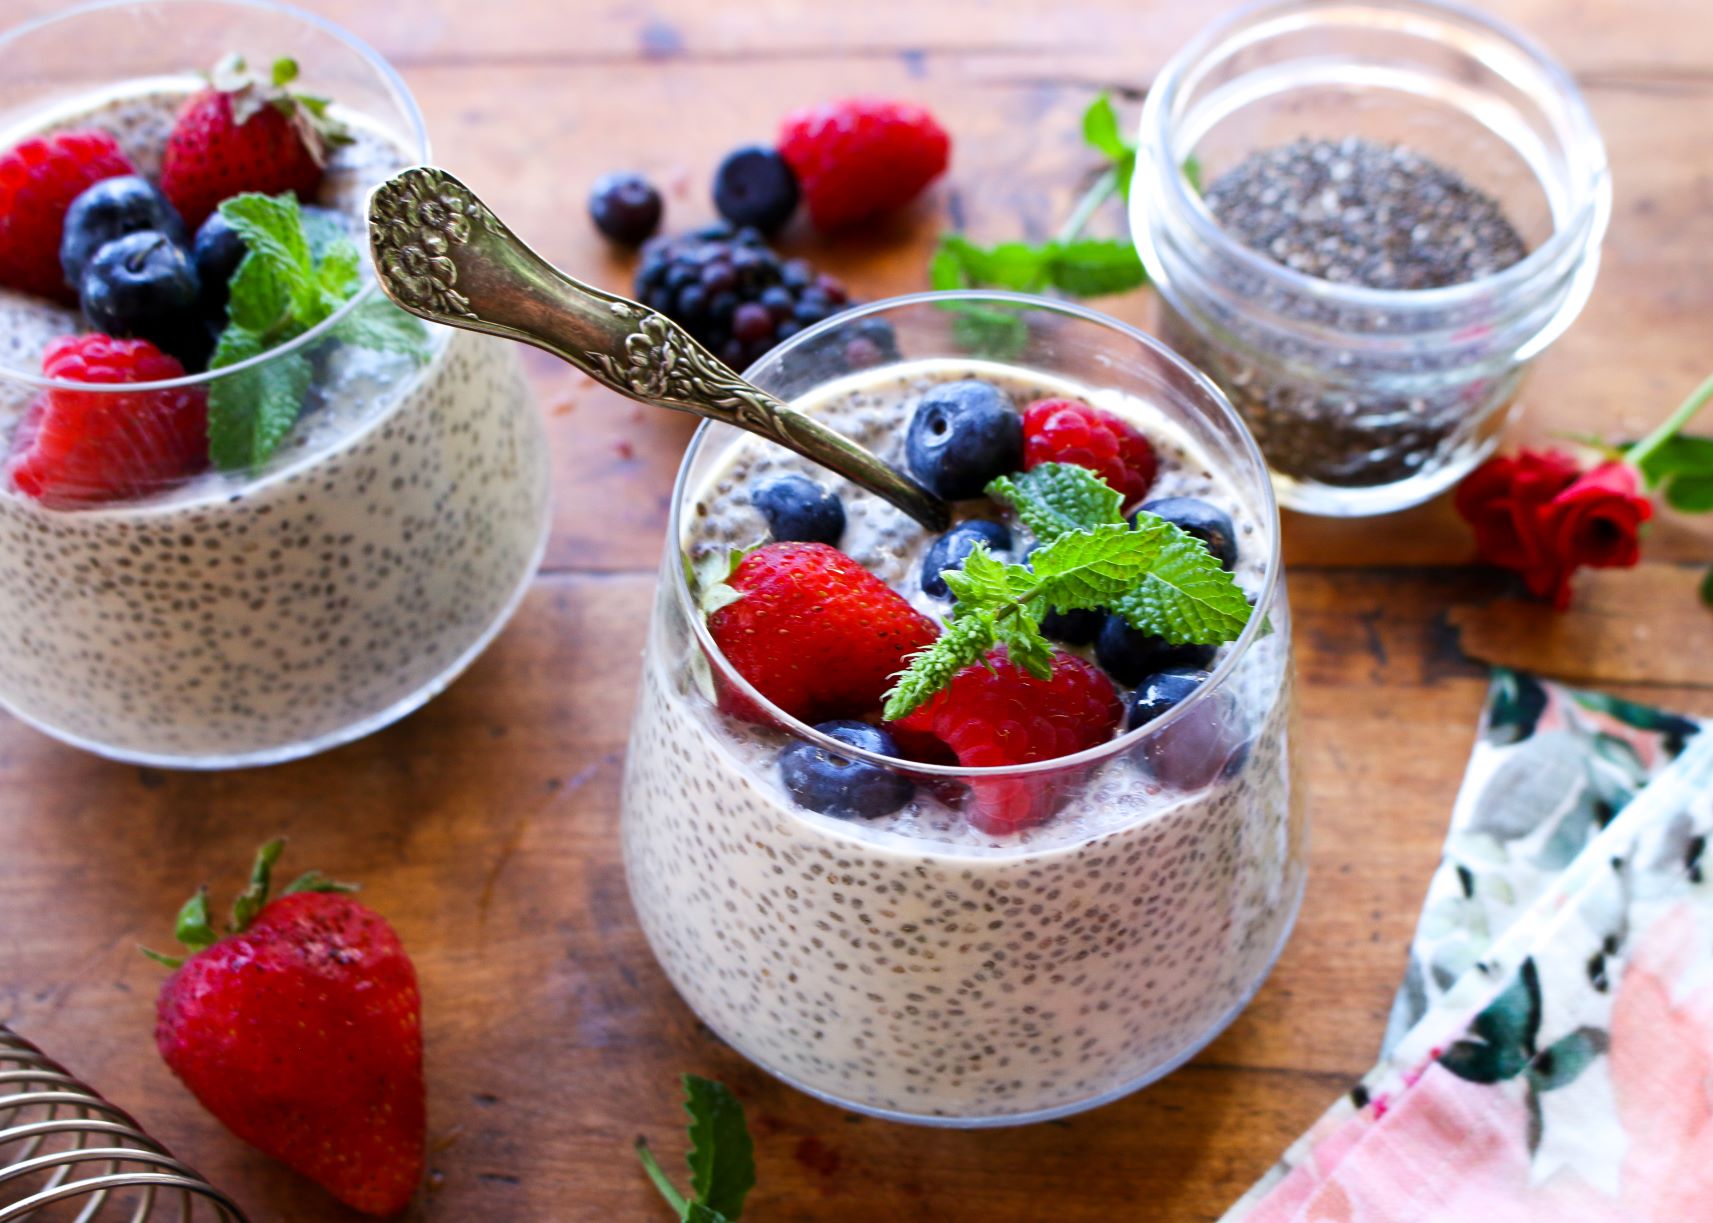 https://eadn-wc02-3894996.nxedge.io/wp-content/uploads/2017/06/soy-chia-pudding-updated-6.jpg